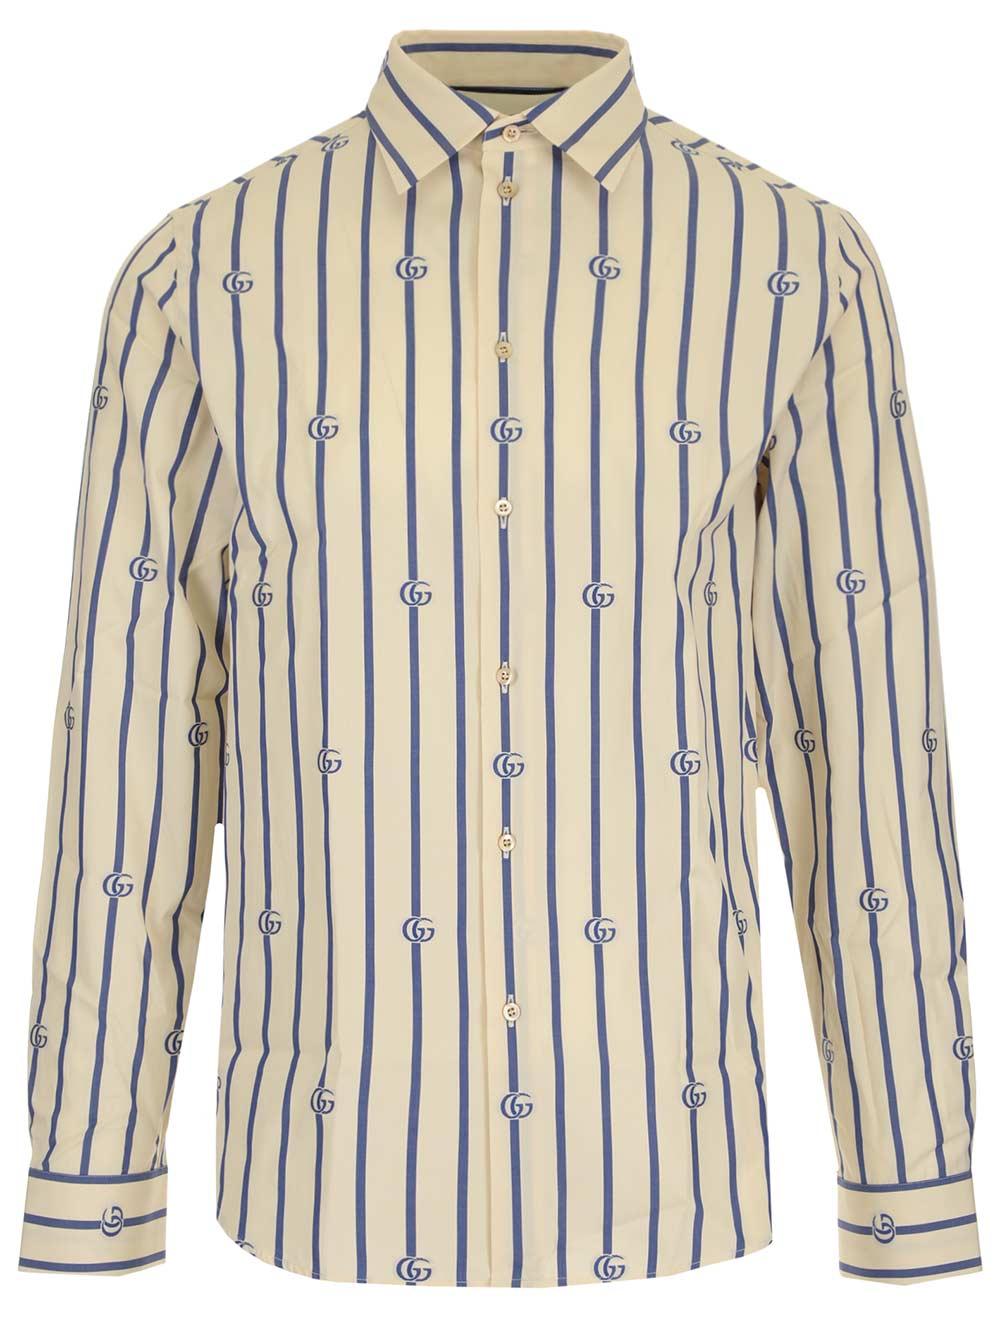 Gucci Cotton GG Striped Shirt for Men - Lyst